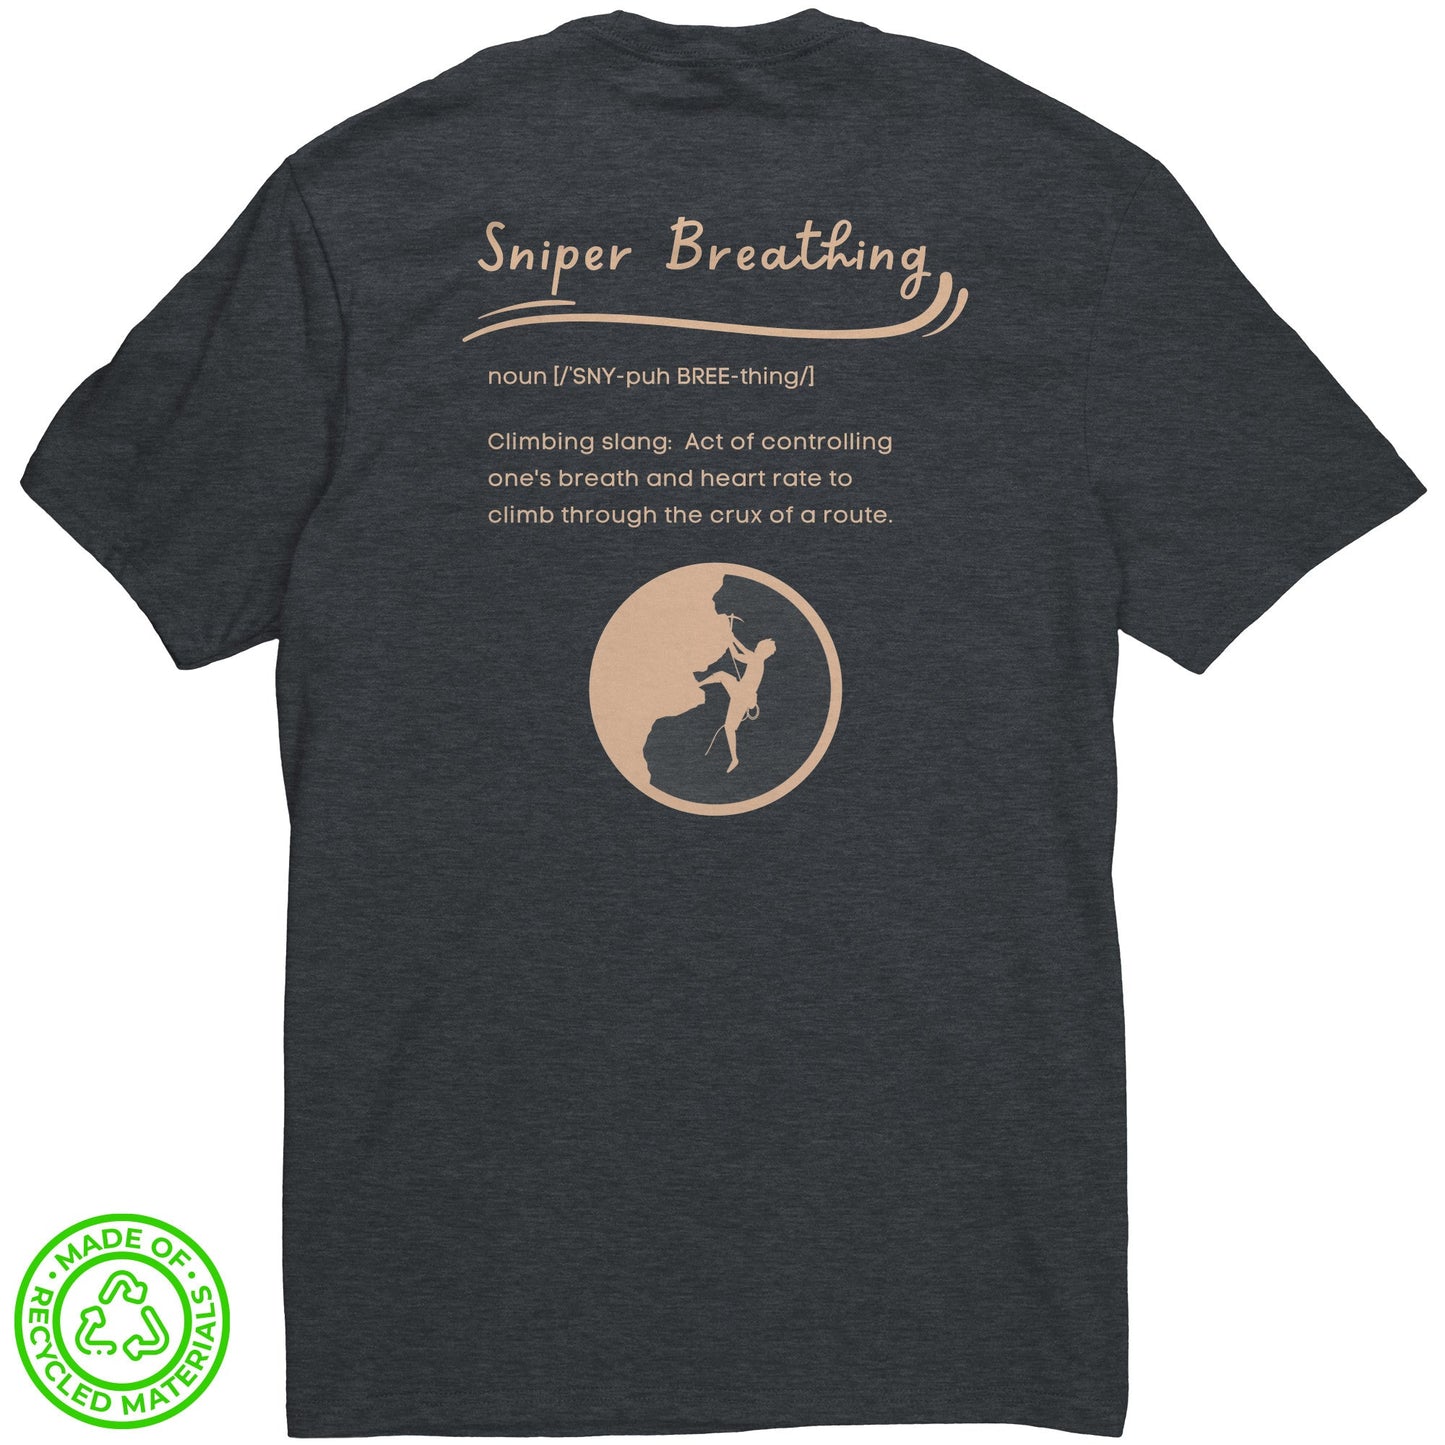 Eco-Friendly Re-Tee (Sniper Breathing)